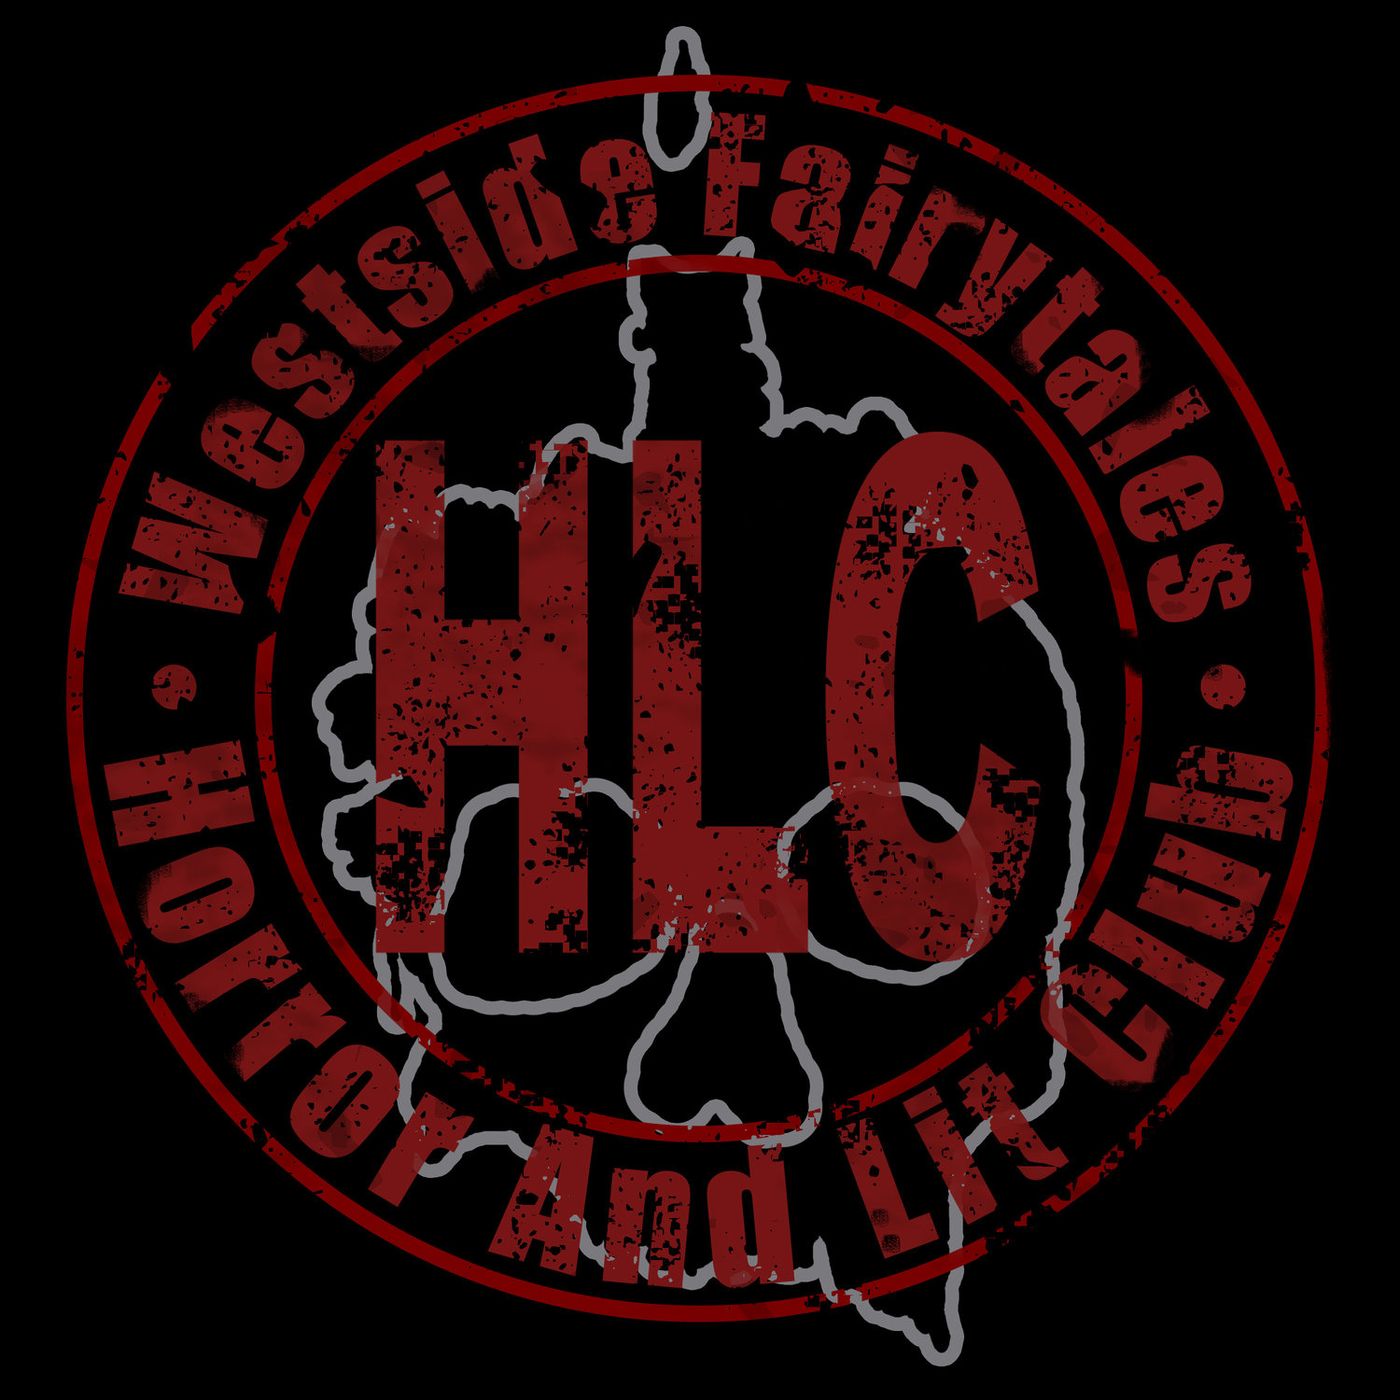 HLC - Dead by Daylight and ”It” by Stephen King